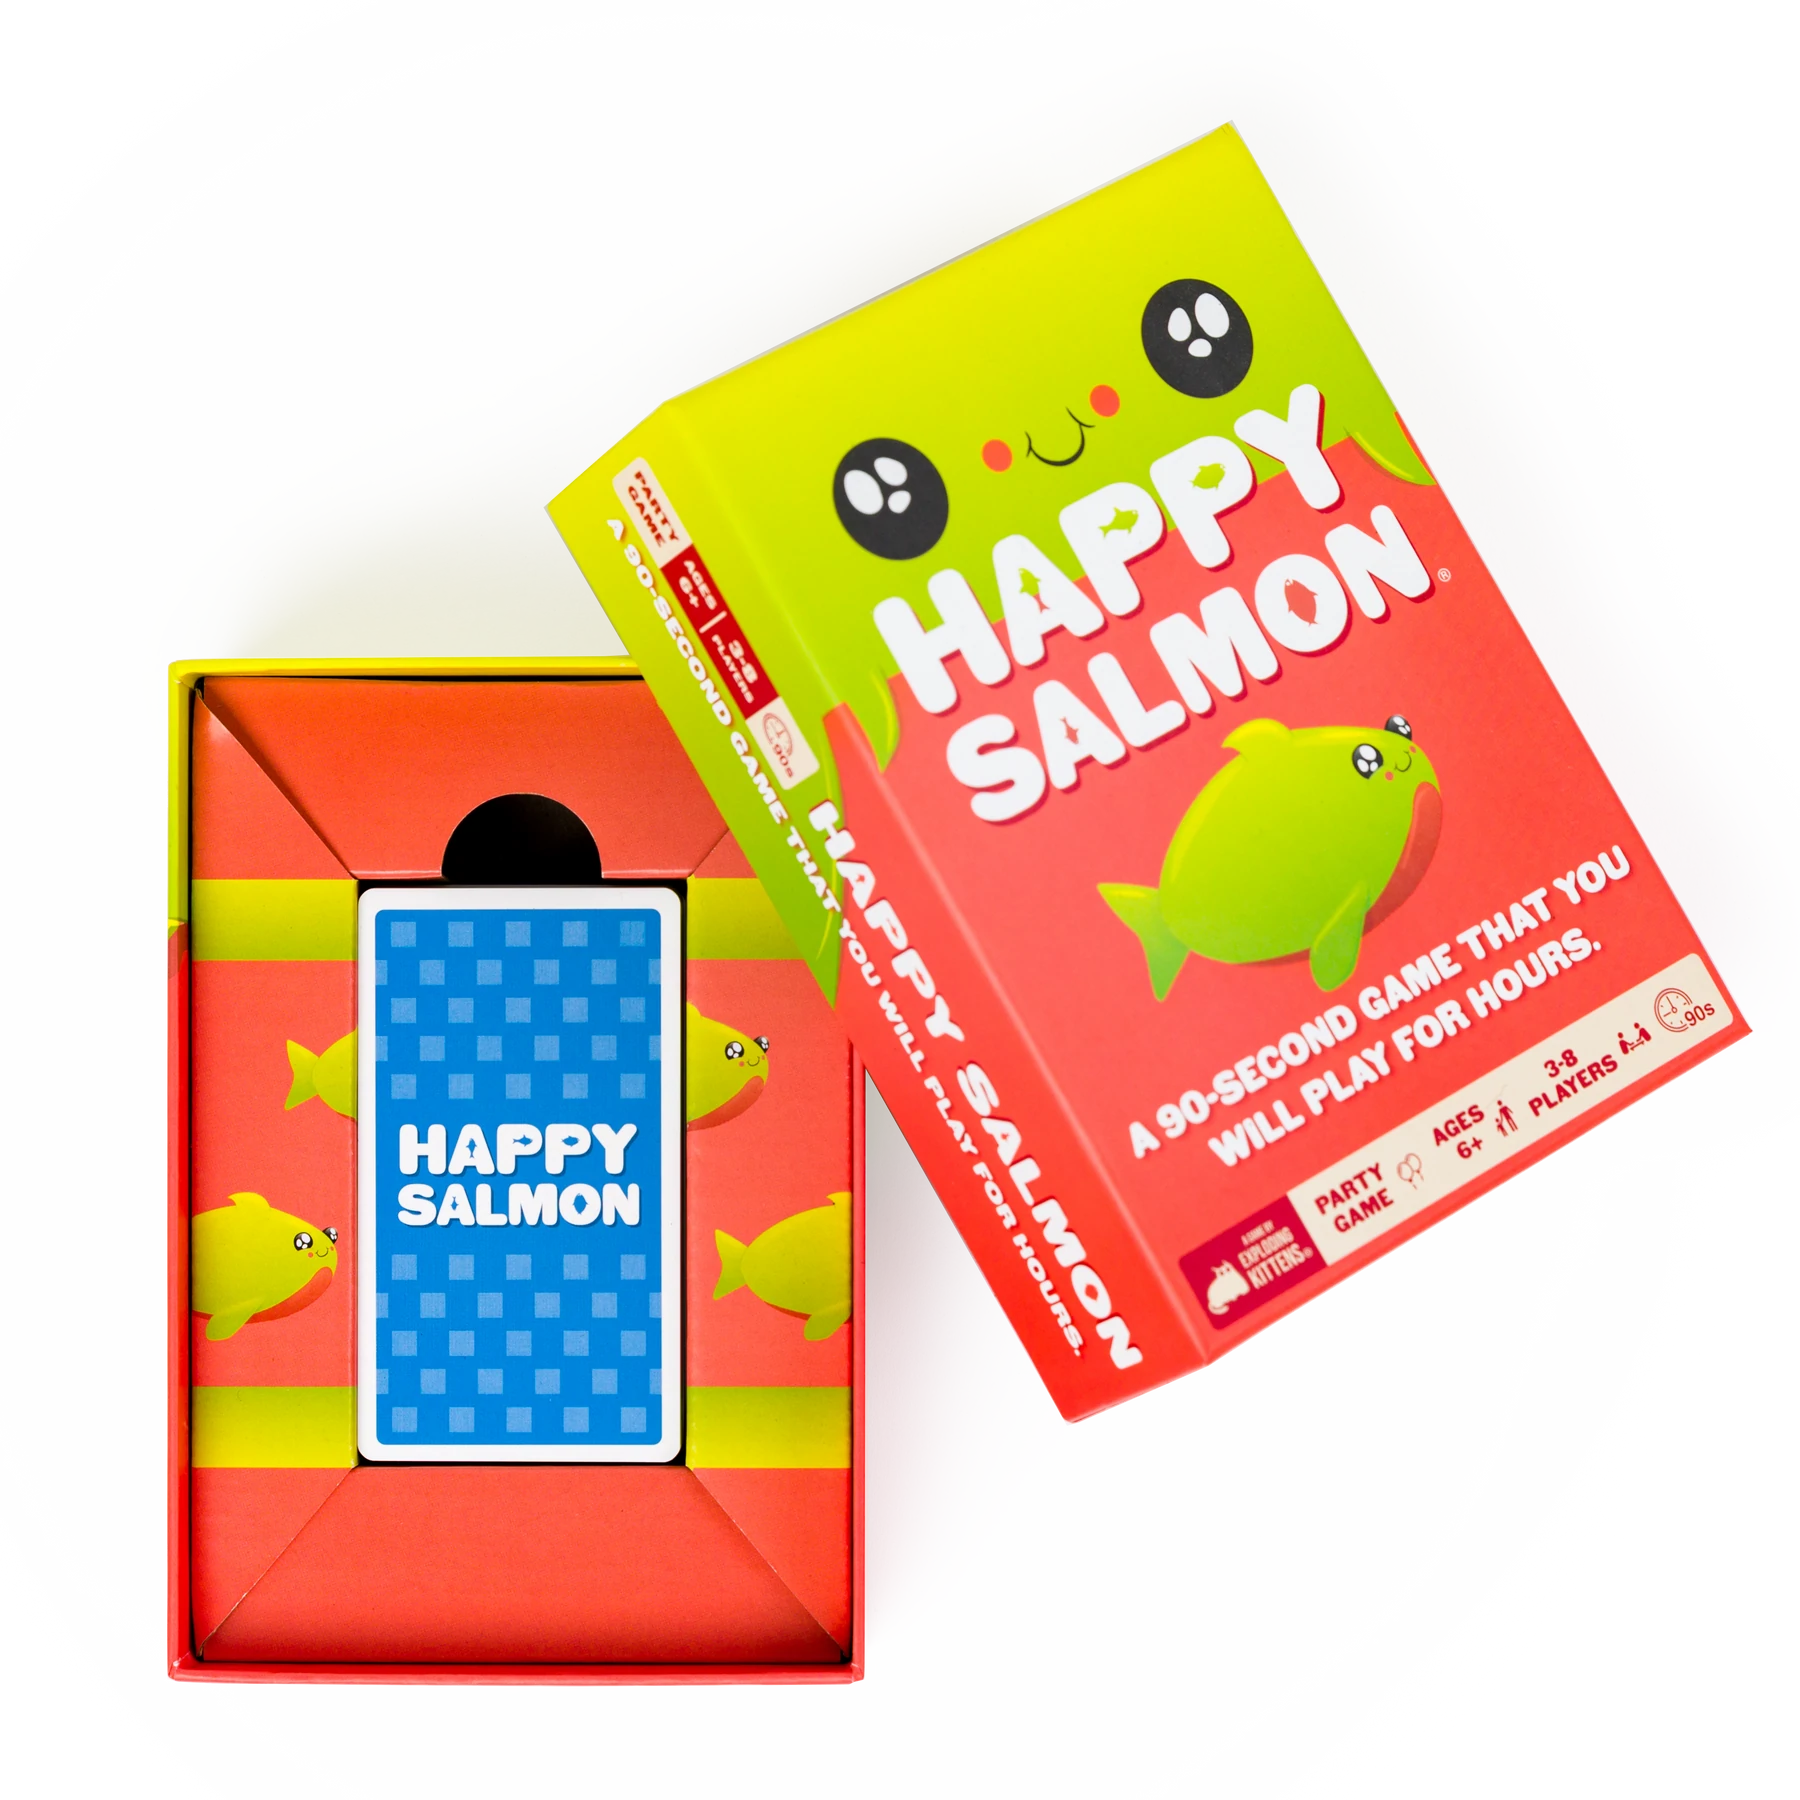 Happy Salmon, Party Card Game